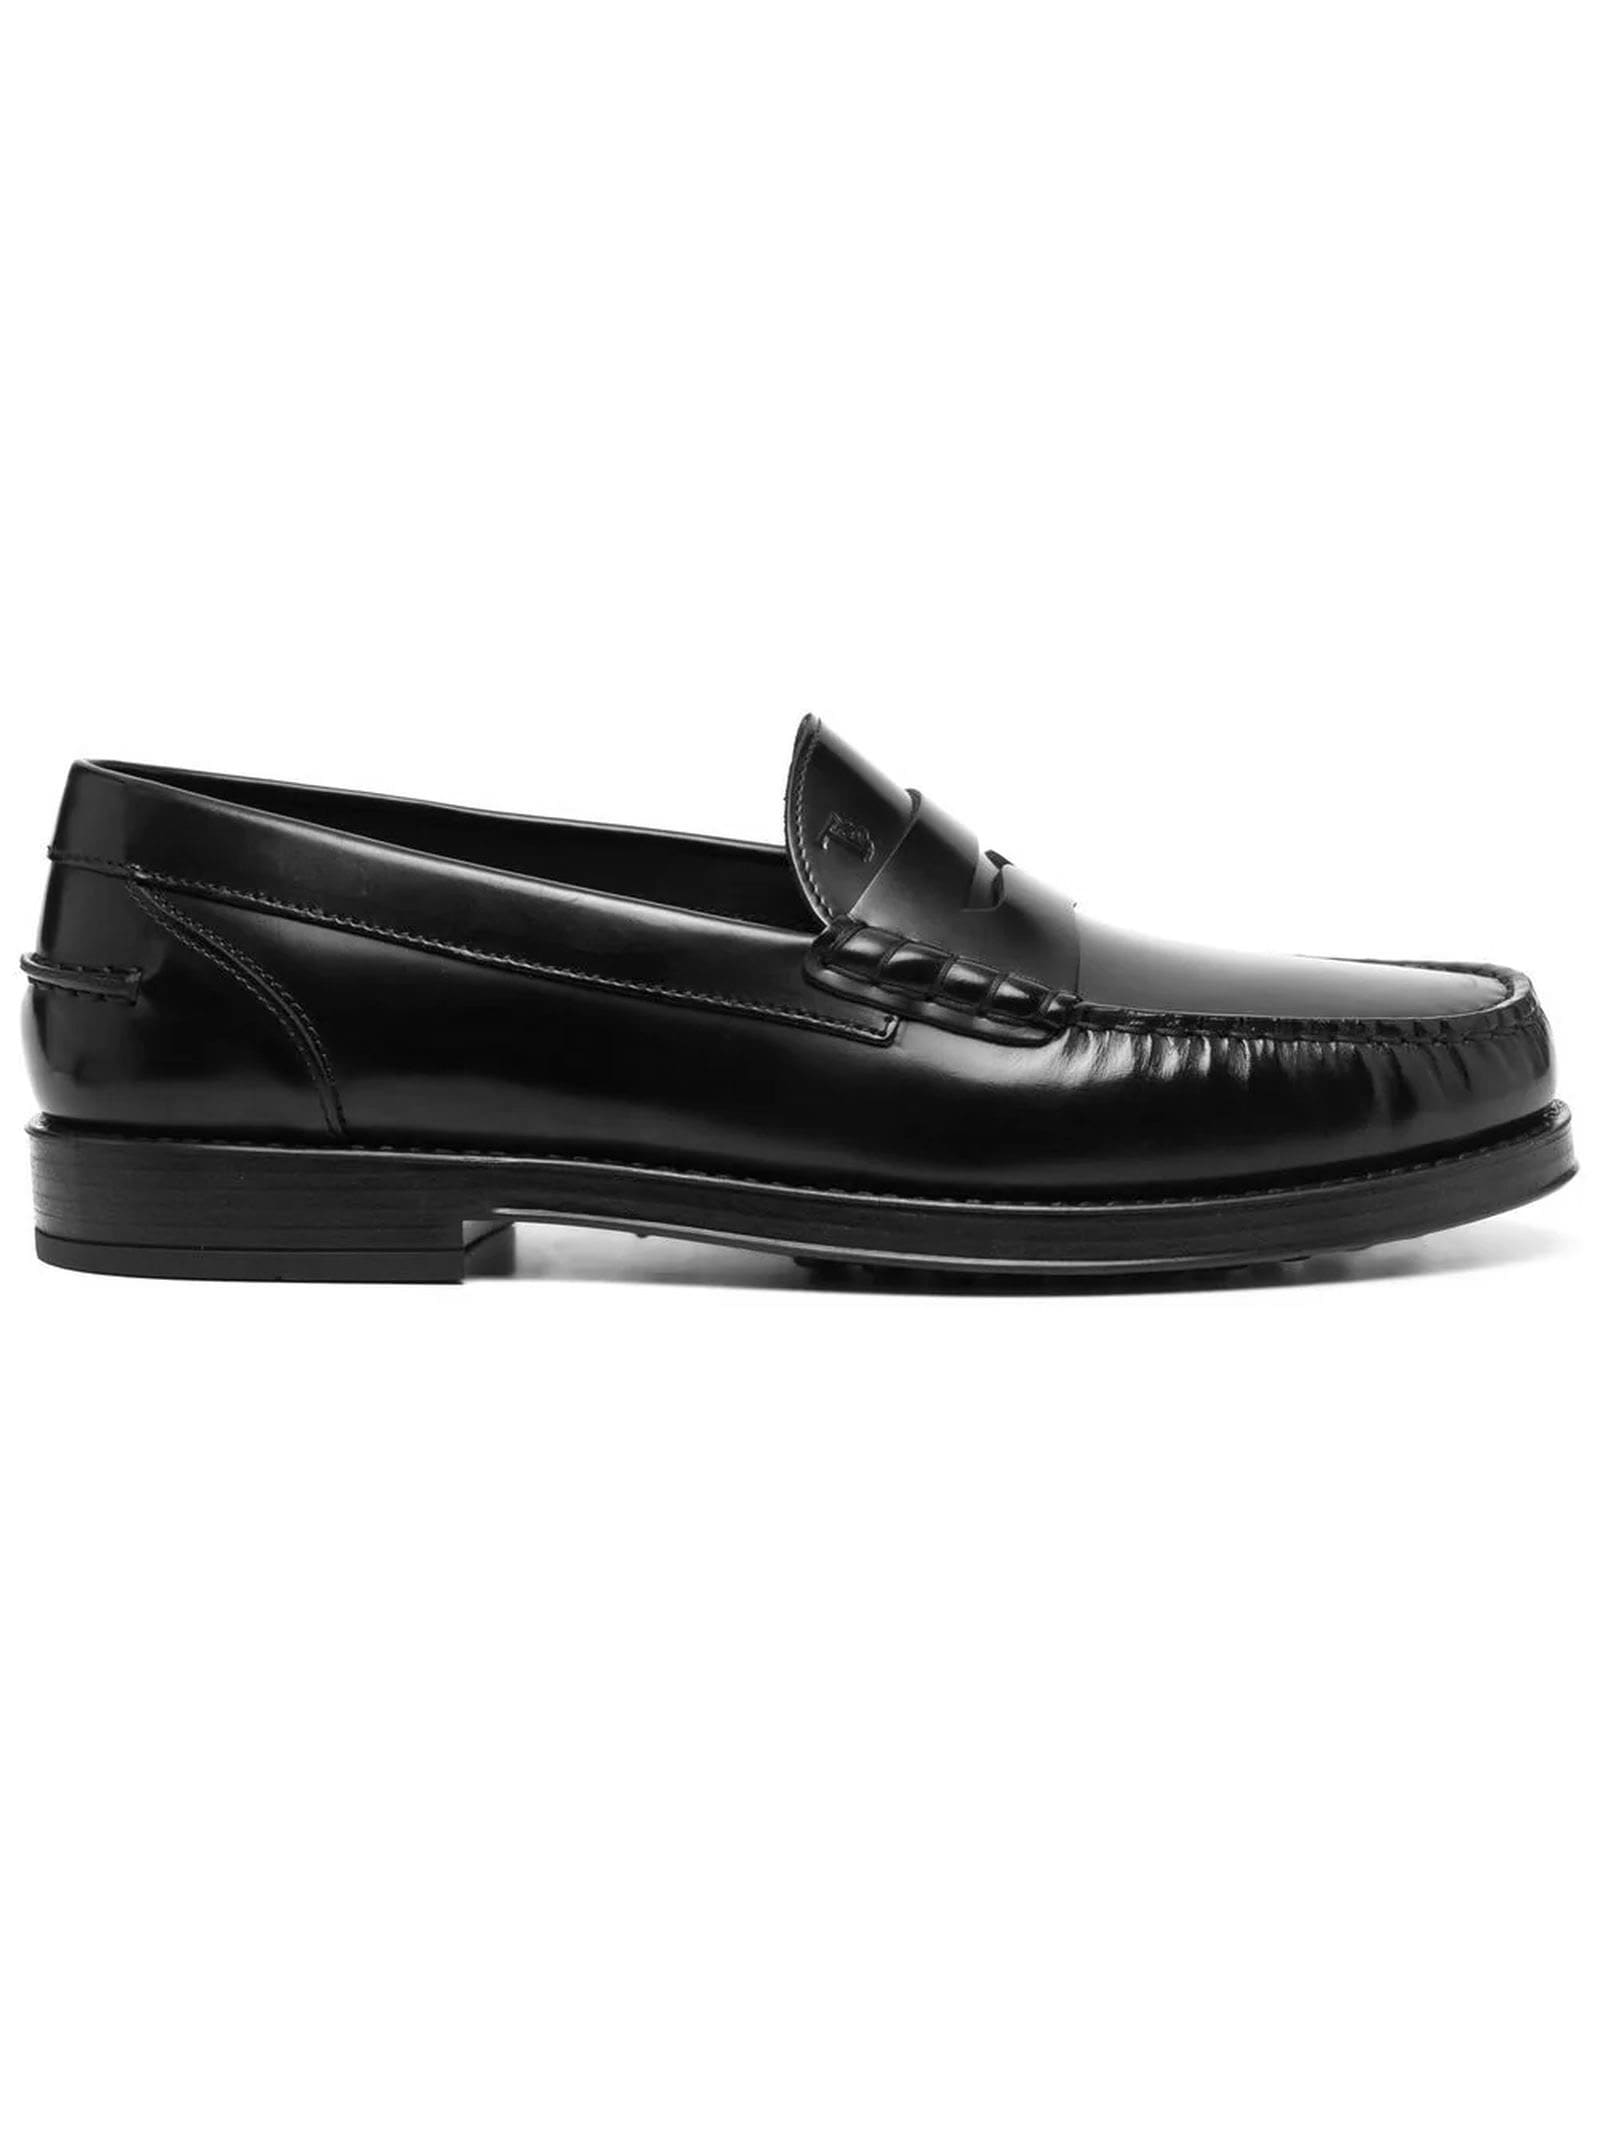 Tods Loafers In Black Brushed Leather